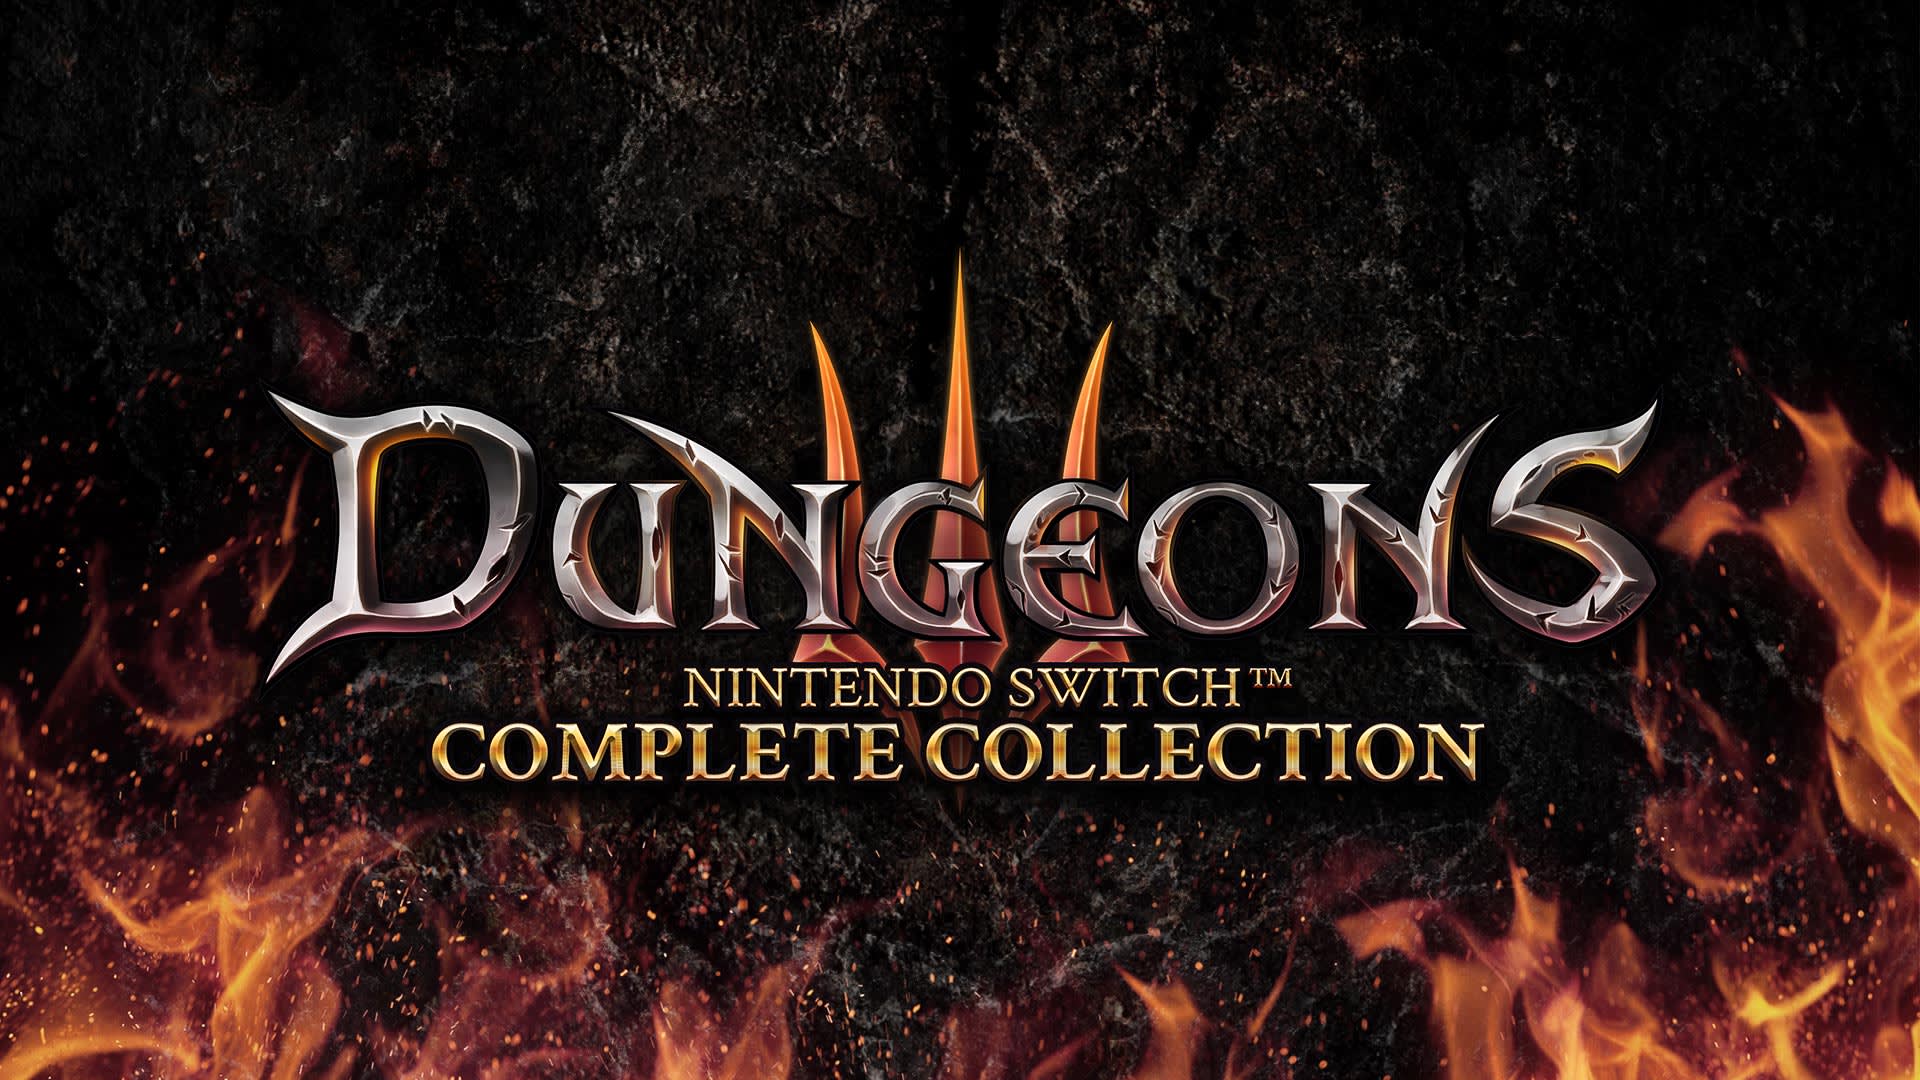 Dungeons 3 - Nintendo Switch™ Complete Collection 1